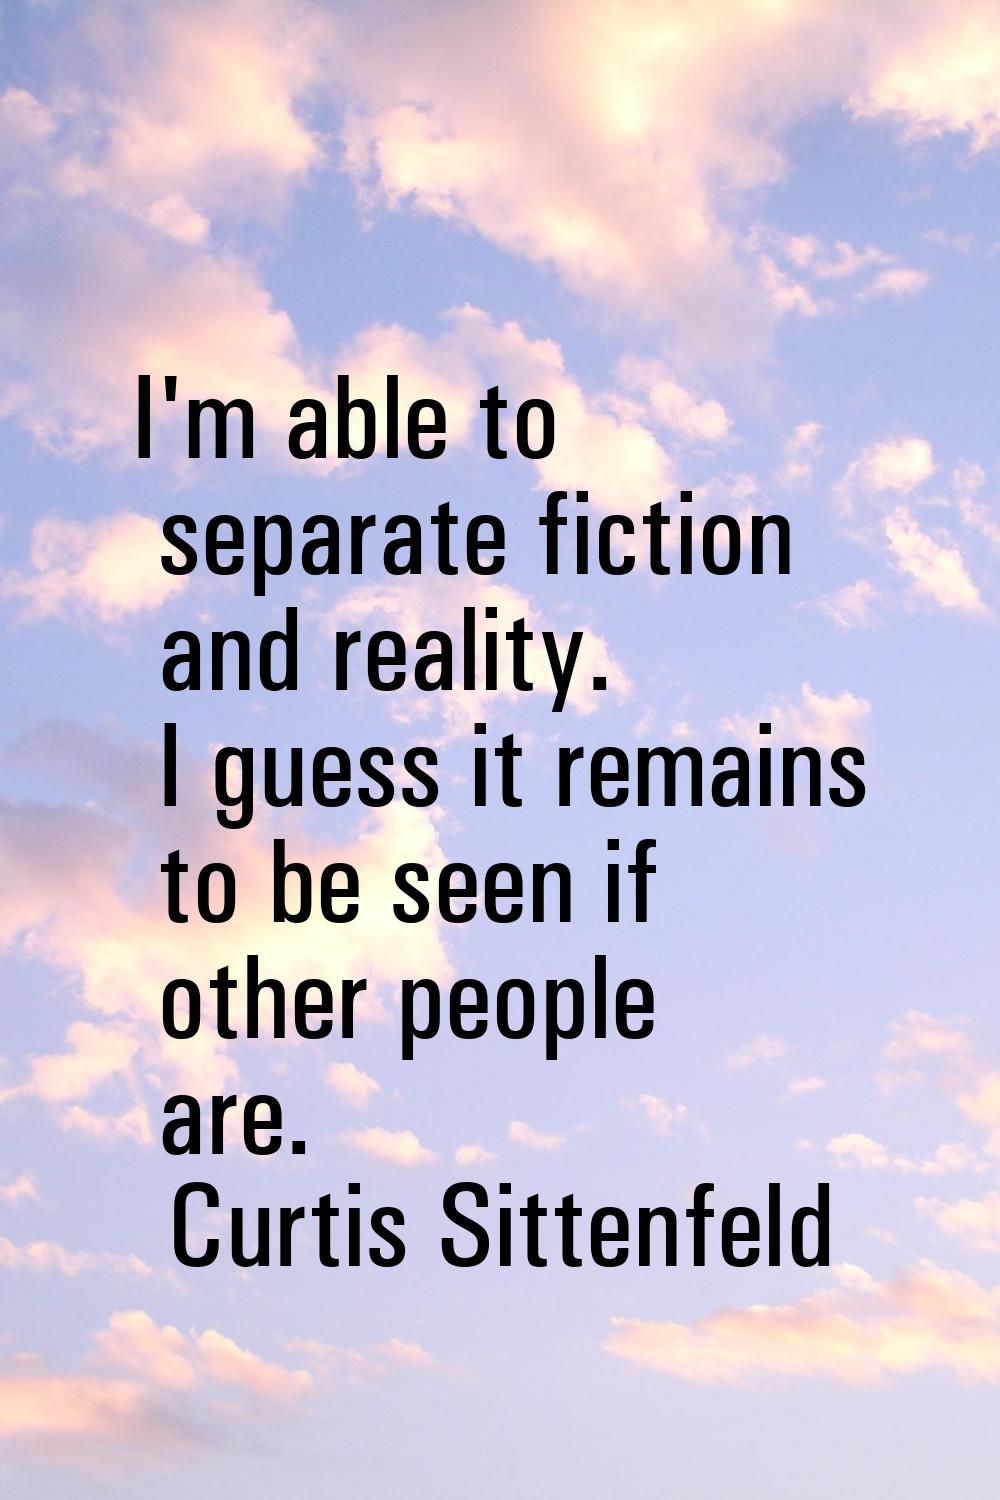 I'm able to separate fiction and reality. I guess it remains to be seen if other people are.